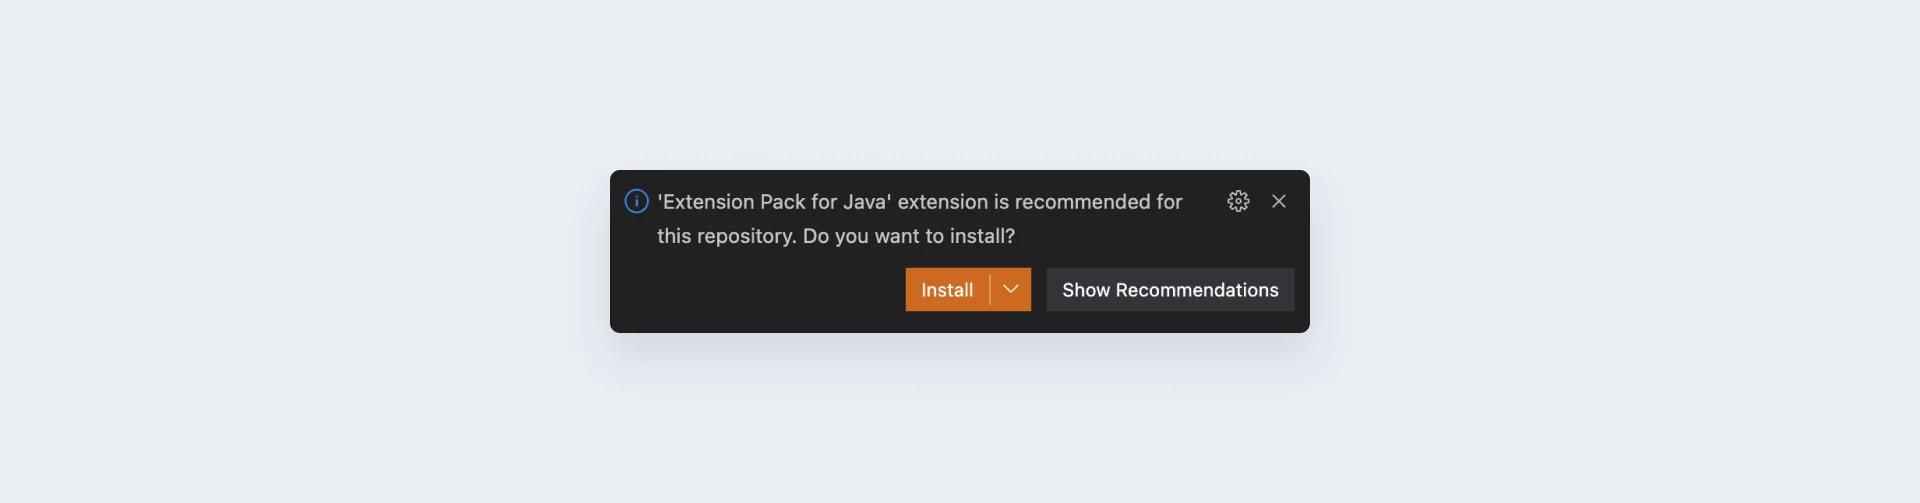 Do you want to install extensions for Java?